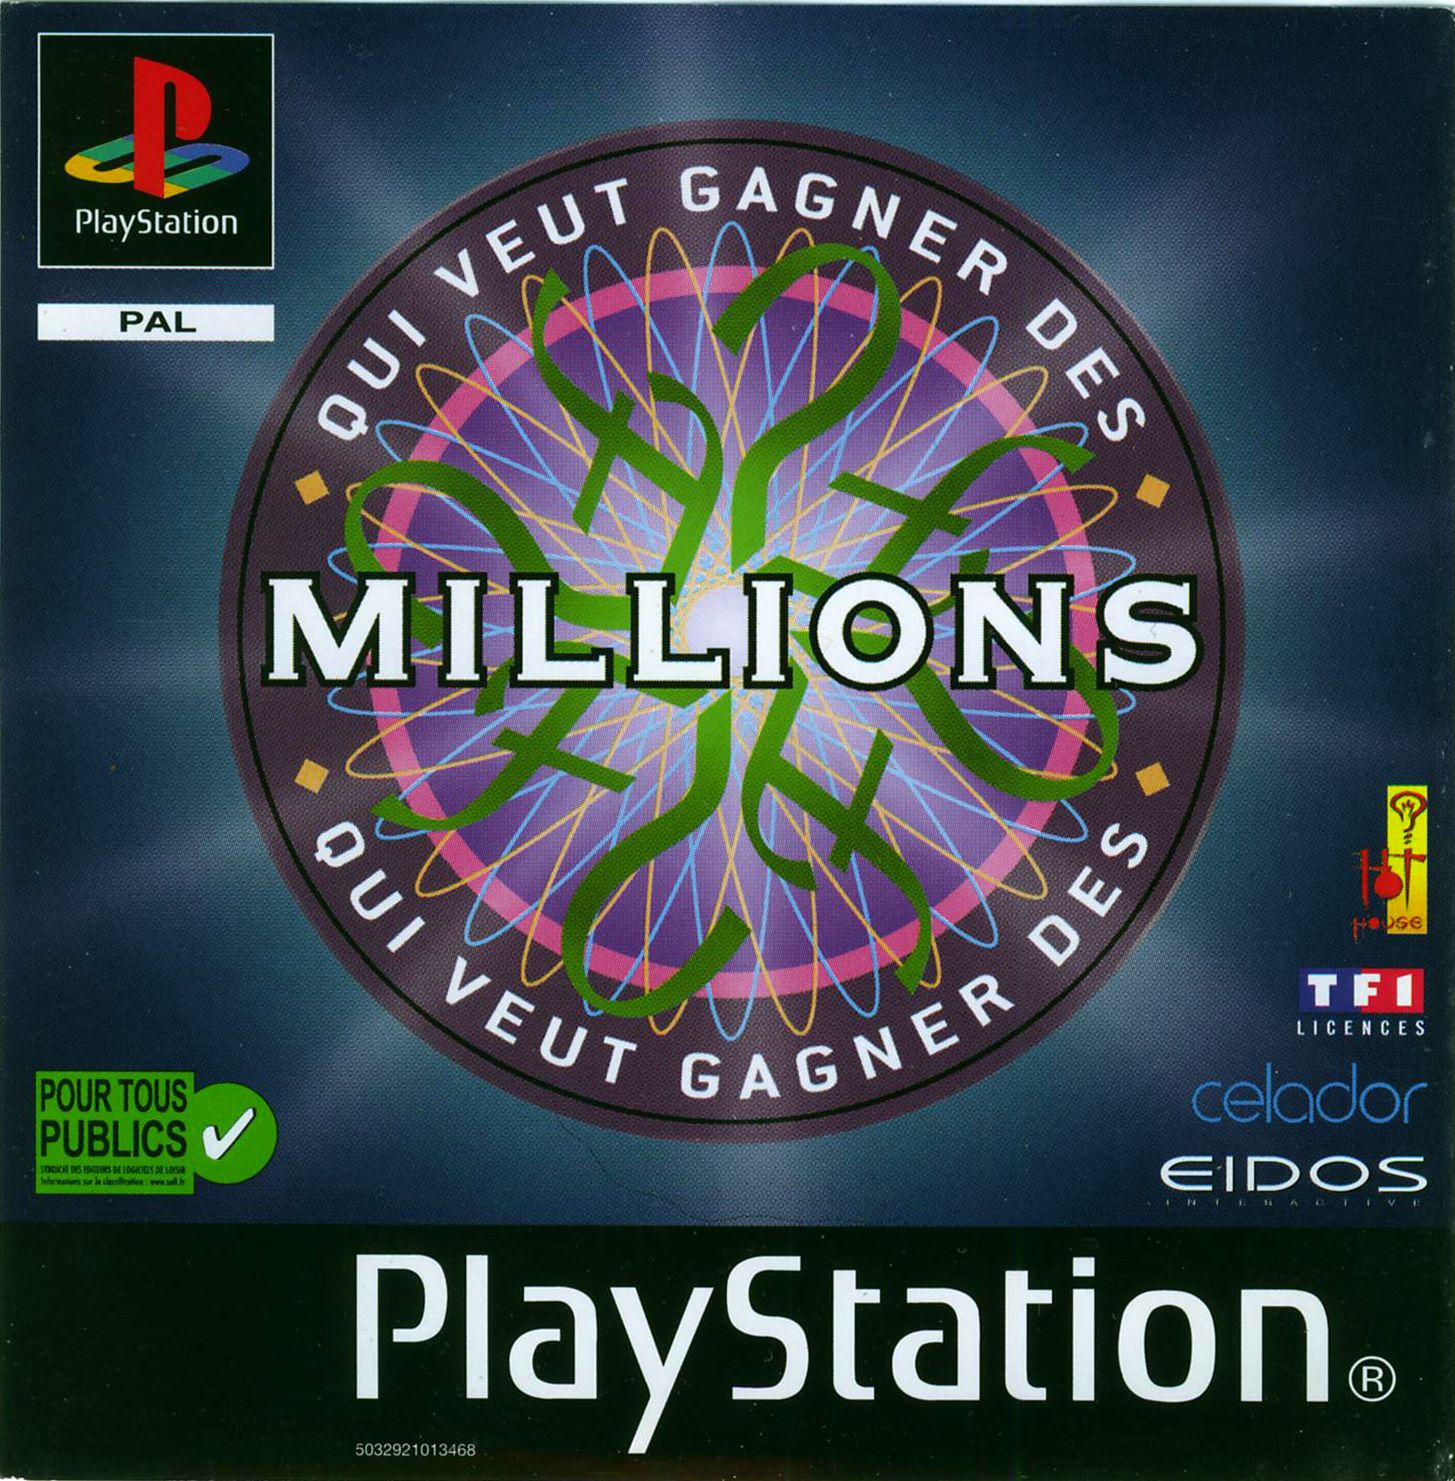 Who wants to be the to my. Who wants to be a Millionaire Dreamcast. Who wants to be a Millionaire 2000. Qui veut gagner des millions настольная игра.